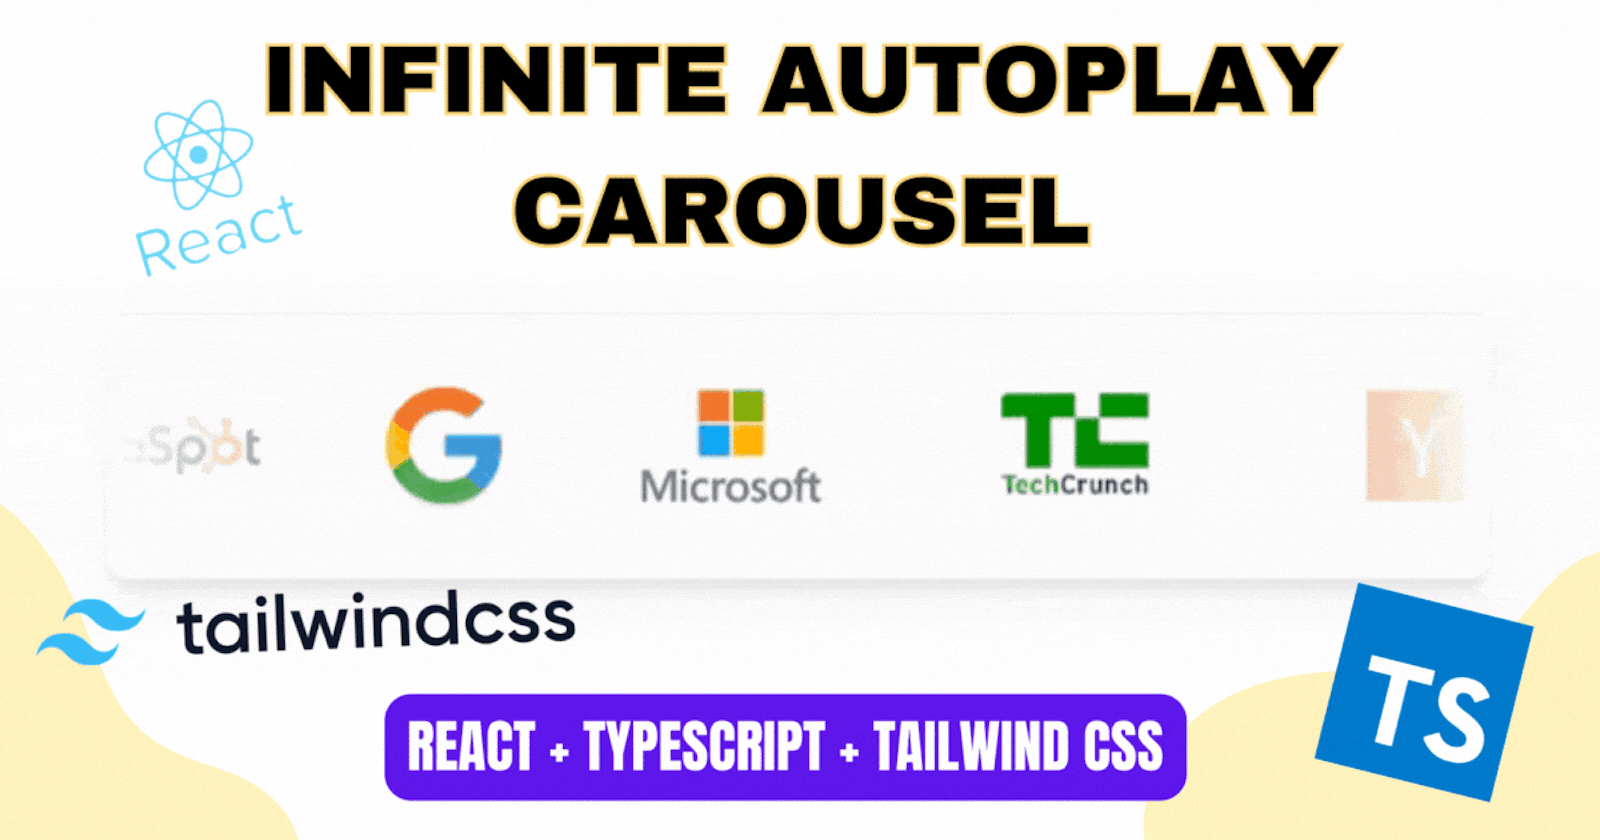 How to Create an Infinite Autoplay Carousel using React, Tailwind CSS and TypeScript